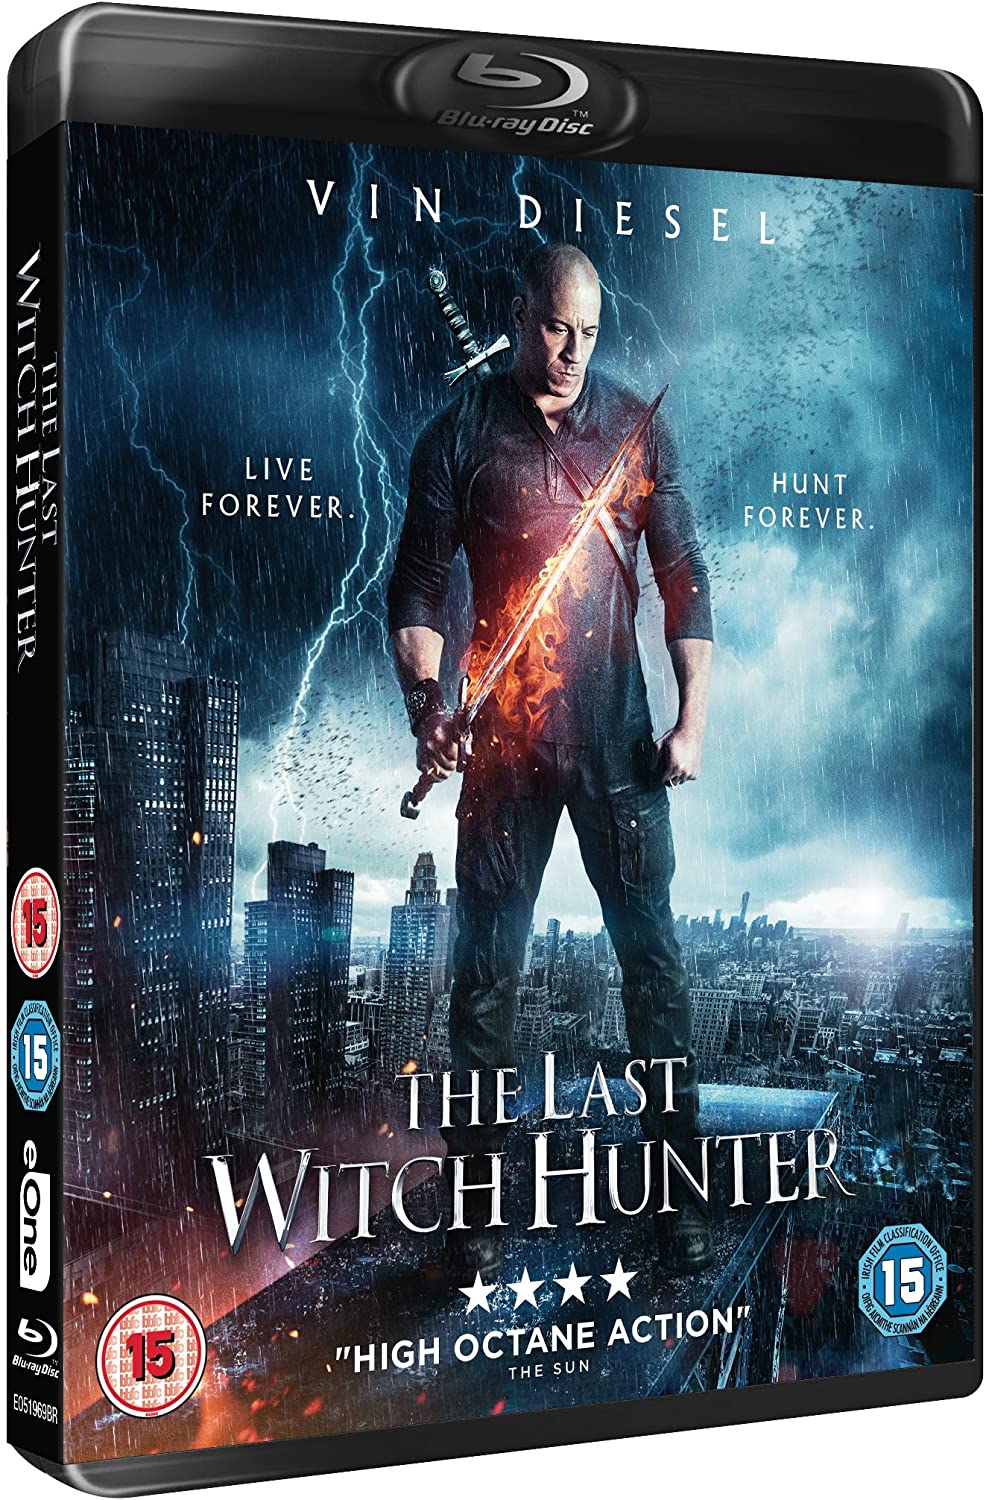 The Last Witch Hunter [2015] (Blu-ray)